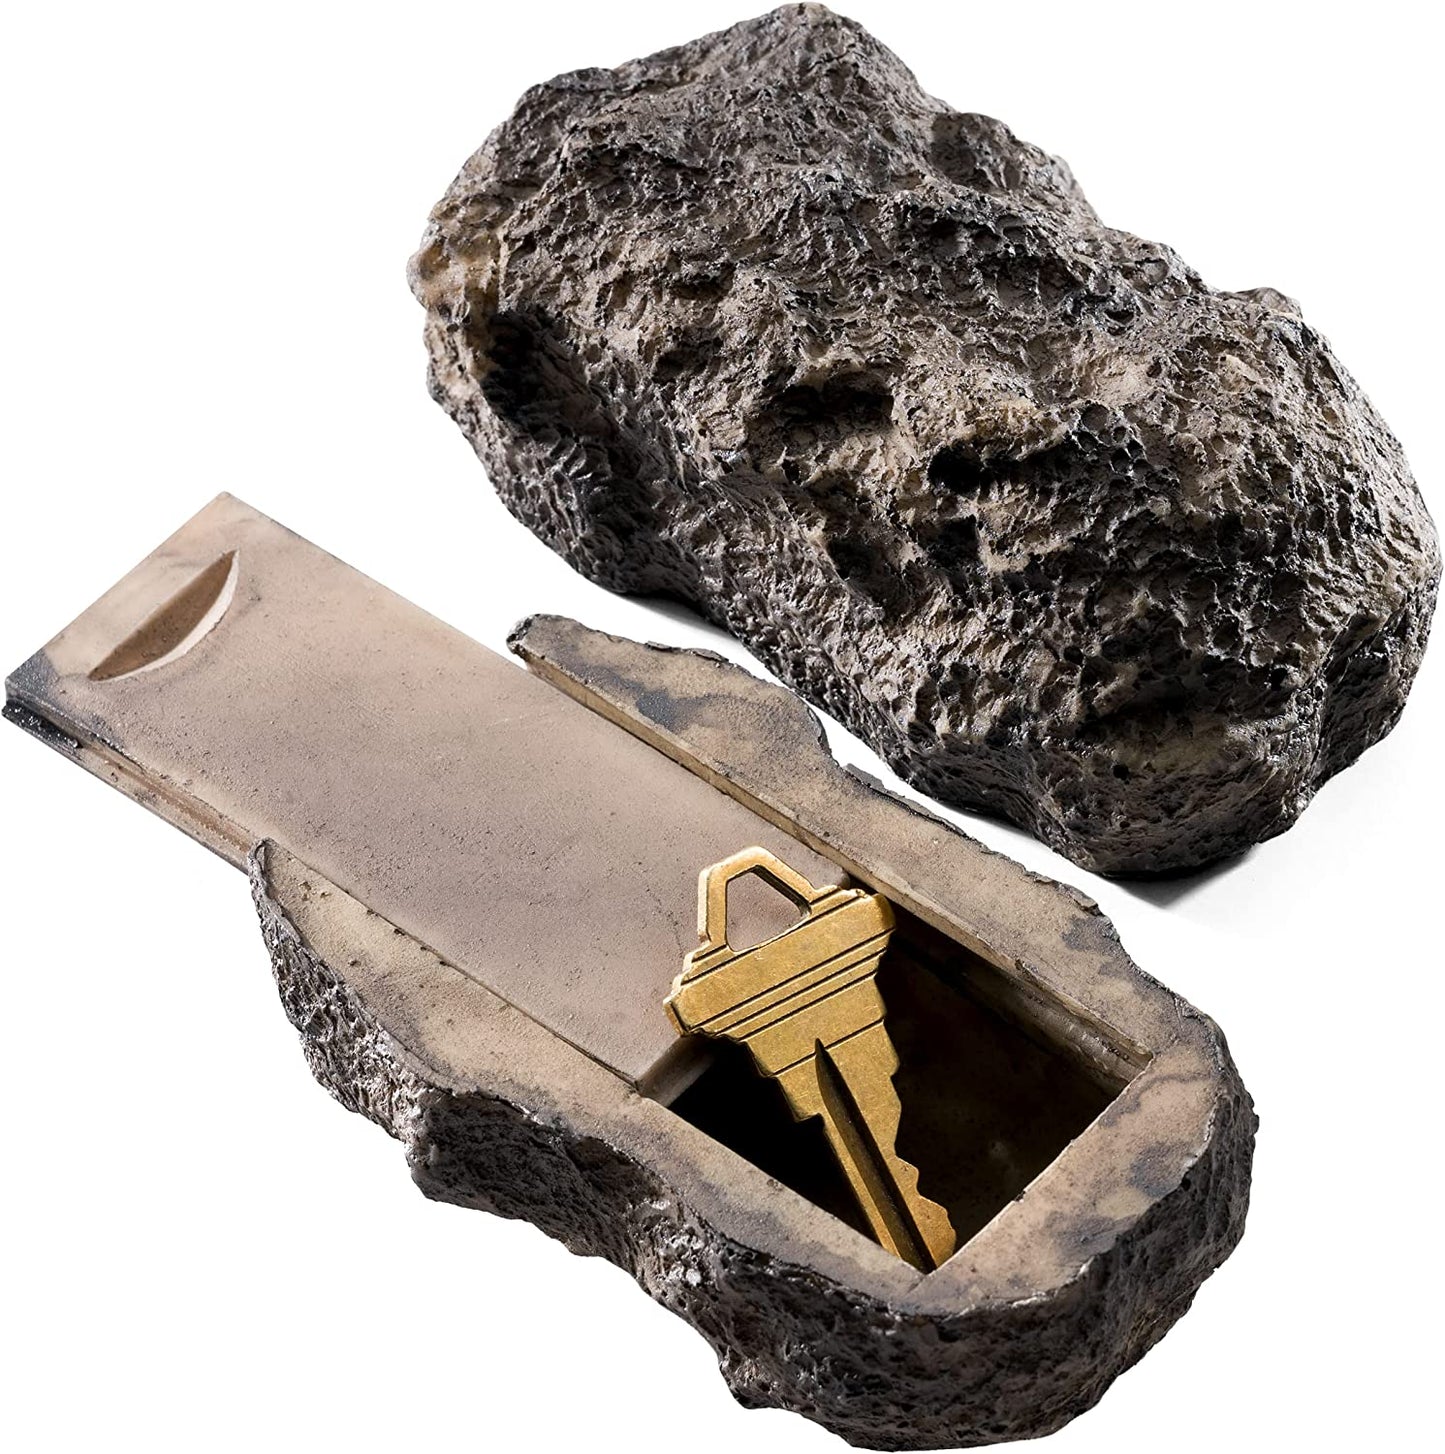  2Pc Hide-a-Spare-Key Fake Rock - Looks & Feels Like Real Stone - Safe for Outdoor Garden or Yard, Geocaching